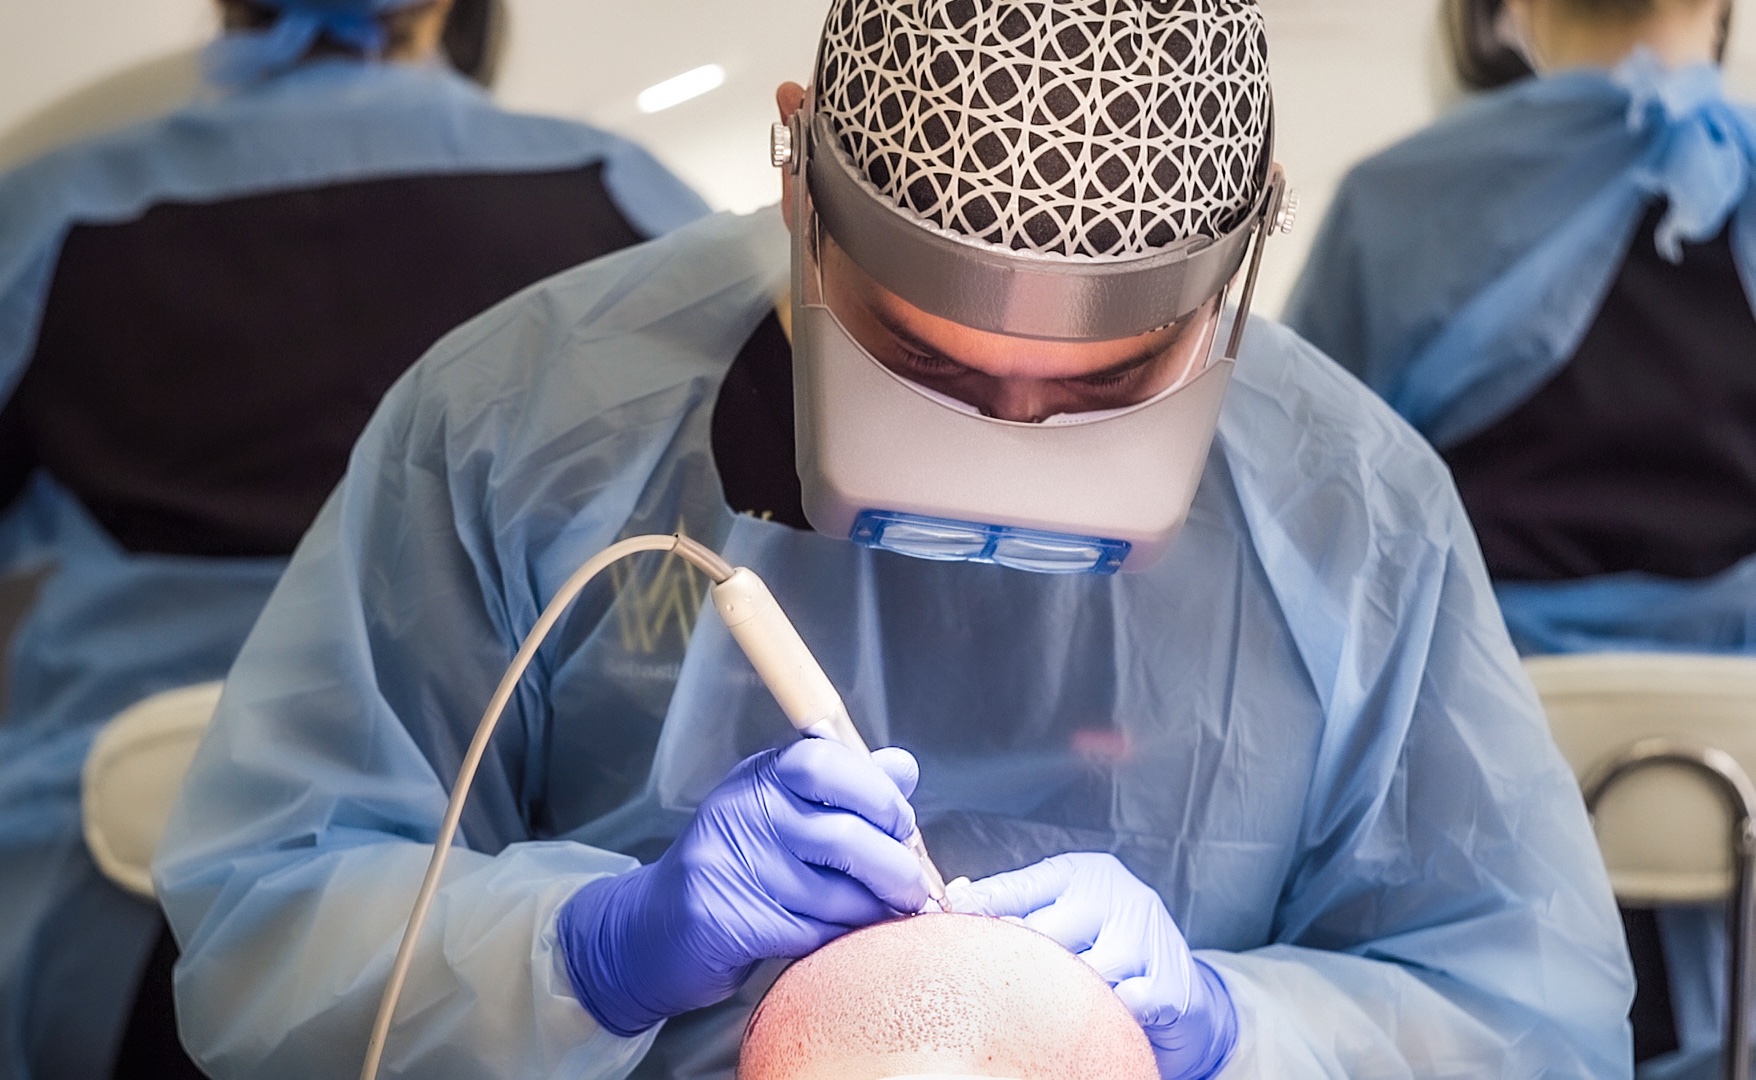 A medical professional specializing in hair surgery, wearing a surgical cap, face shield, and gloves, performs a procedure for male pattern baldness, concentrating intensely on the patient's head in a clinical setting.